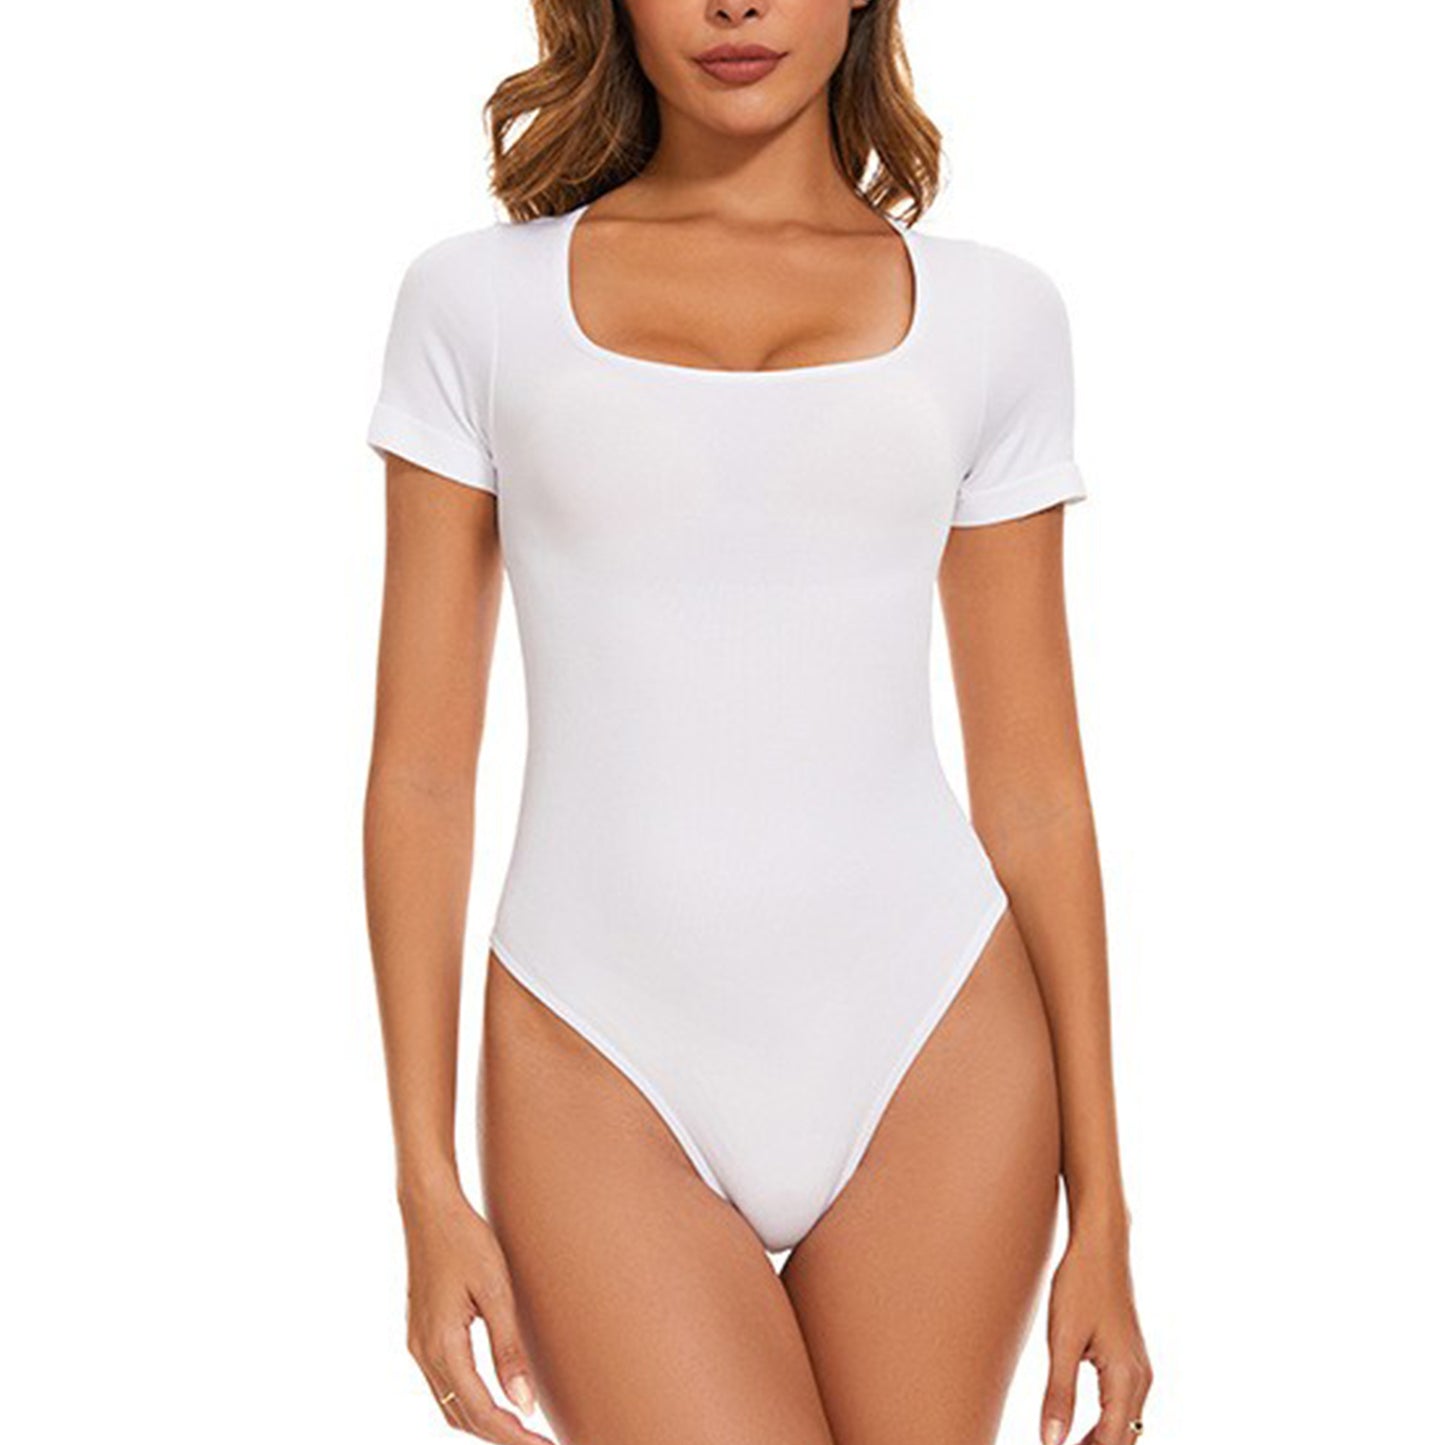 One-piece Corset Belly And Waist Shaping Shaping One-piece Seamless Short Sleeve